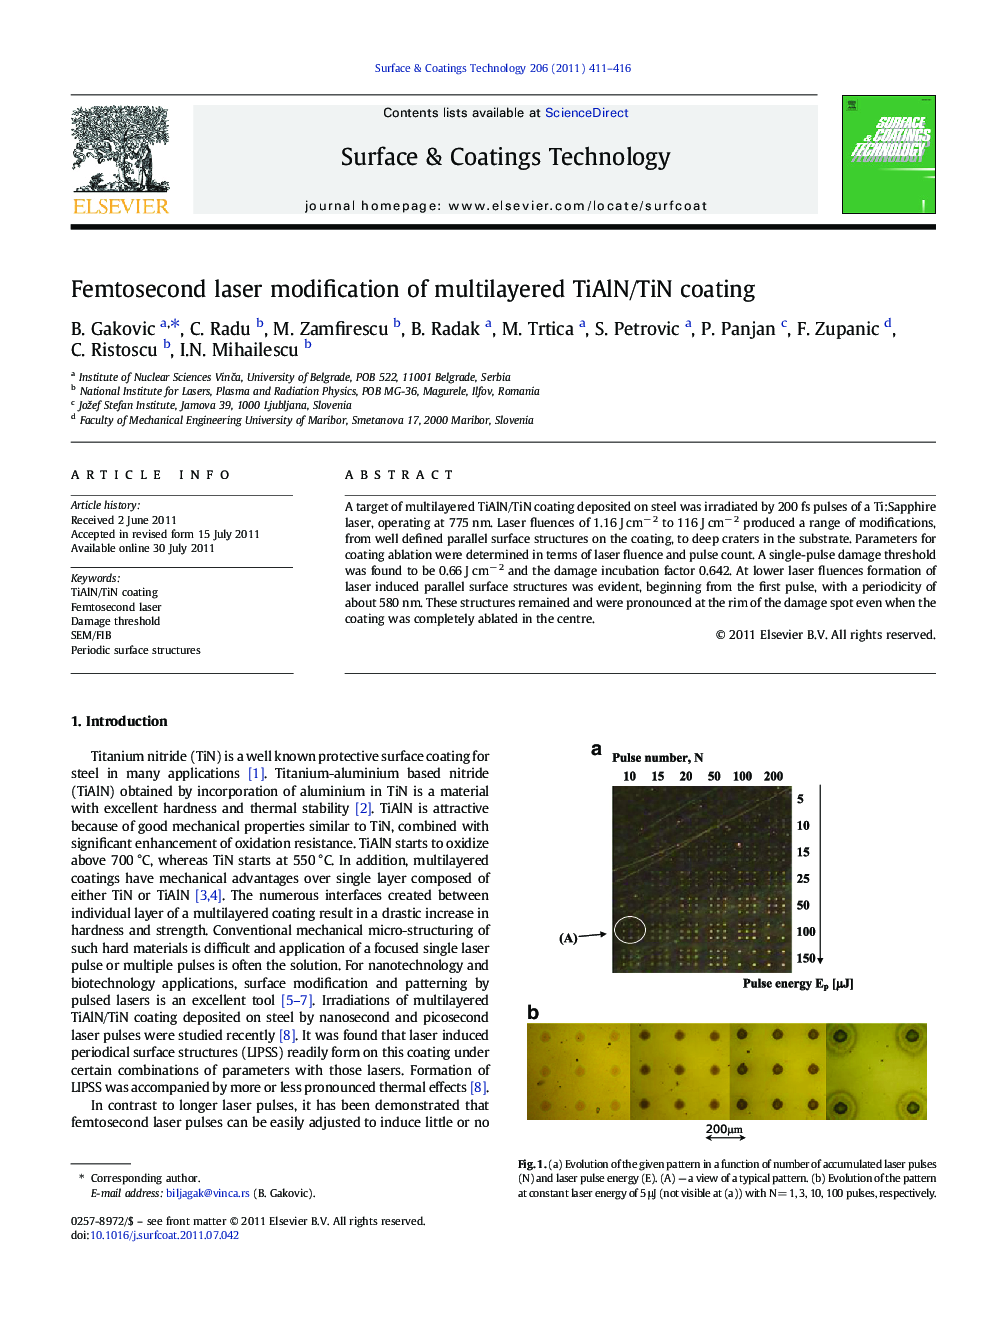 Femtosecond laser modification of multilayered TiAlN/TiN coating